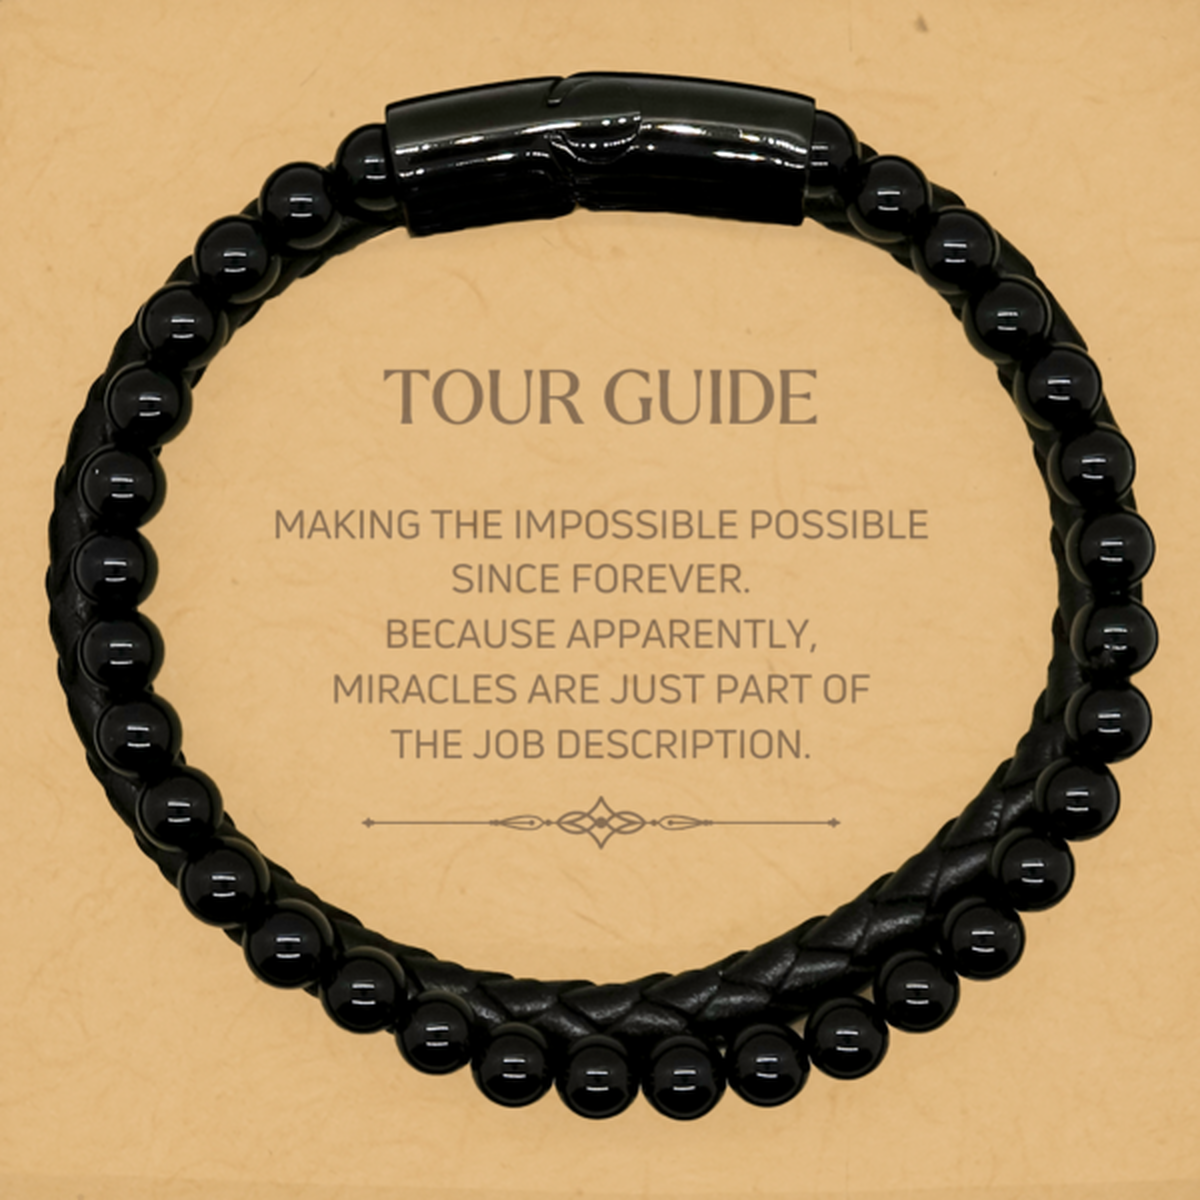 Funny Tour Guide Gifts, Miracles are just part of the job description, Inspirational Birthday Stone Leather Bracelets For Tour Guide, Men, Women, Coworkers, Friends, Boss